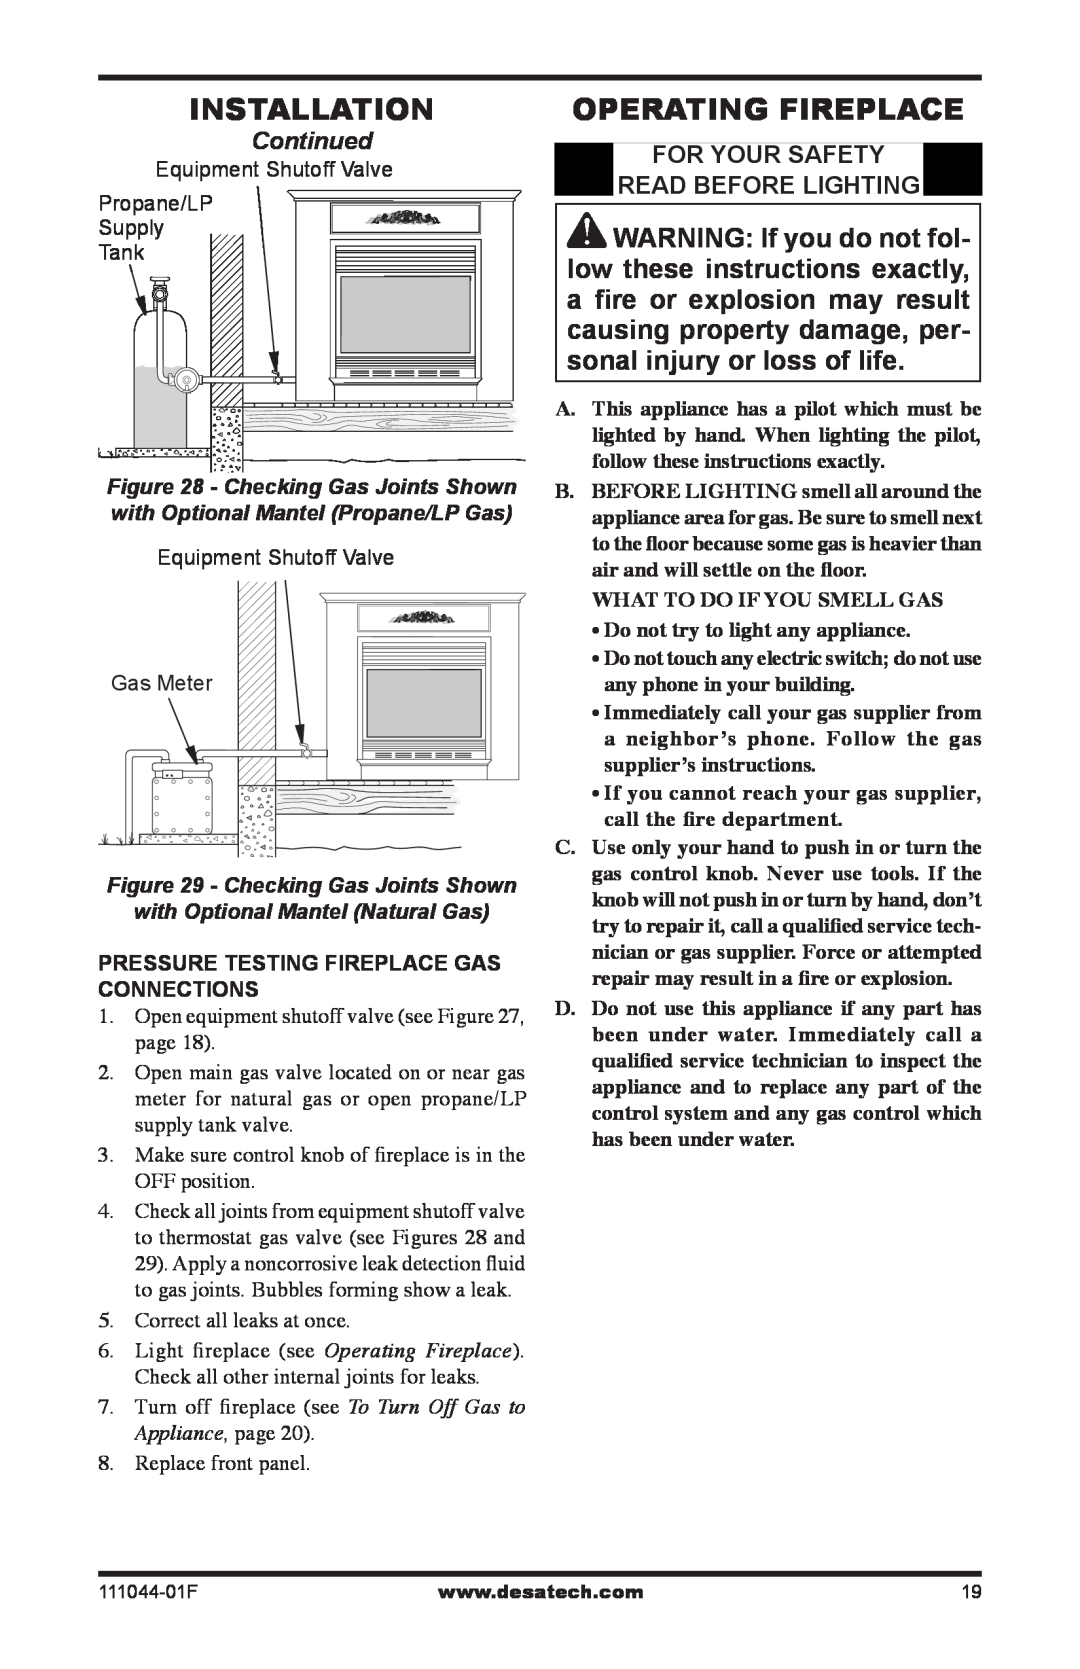 Desa CGCFTP, CGCFTN 14 Installation, Operating Fireplace, WARNING If you do not fol, low these instructions exactly, Tank 